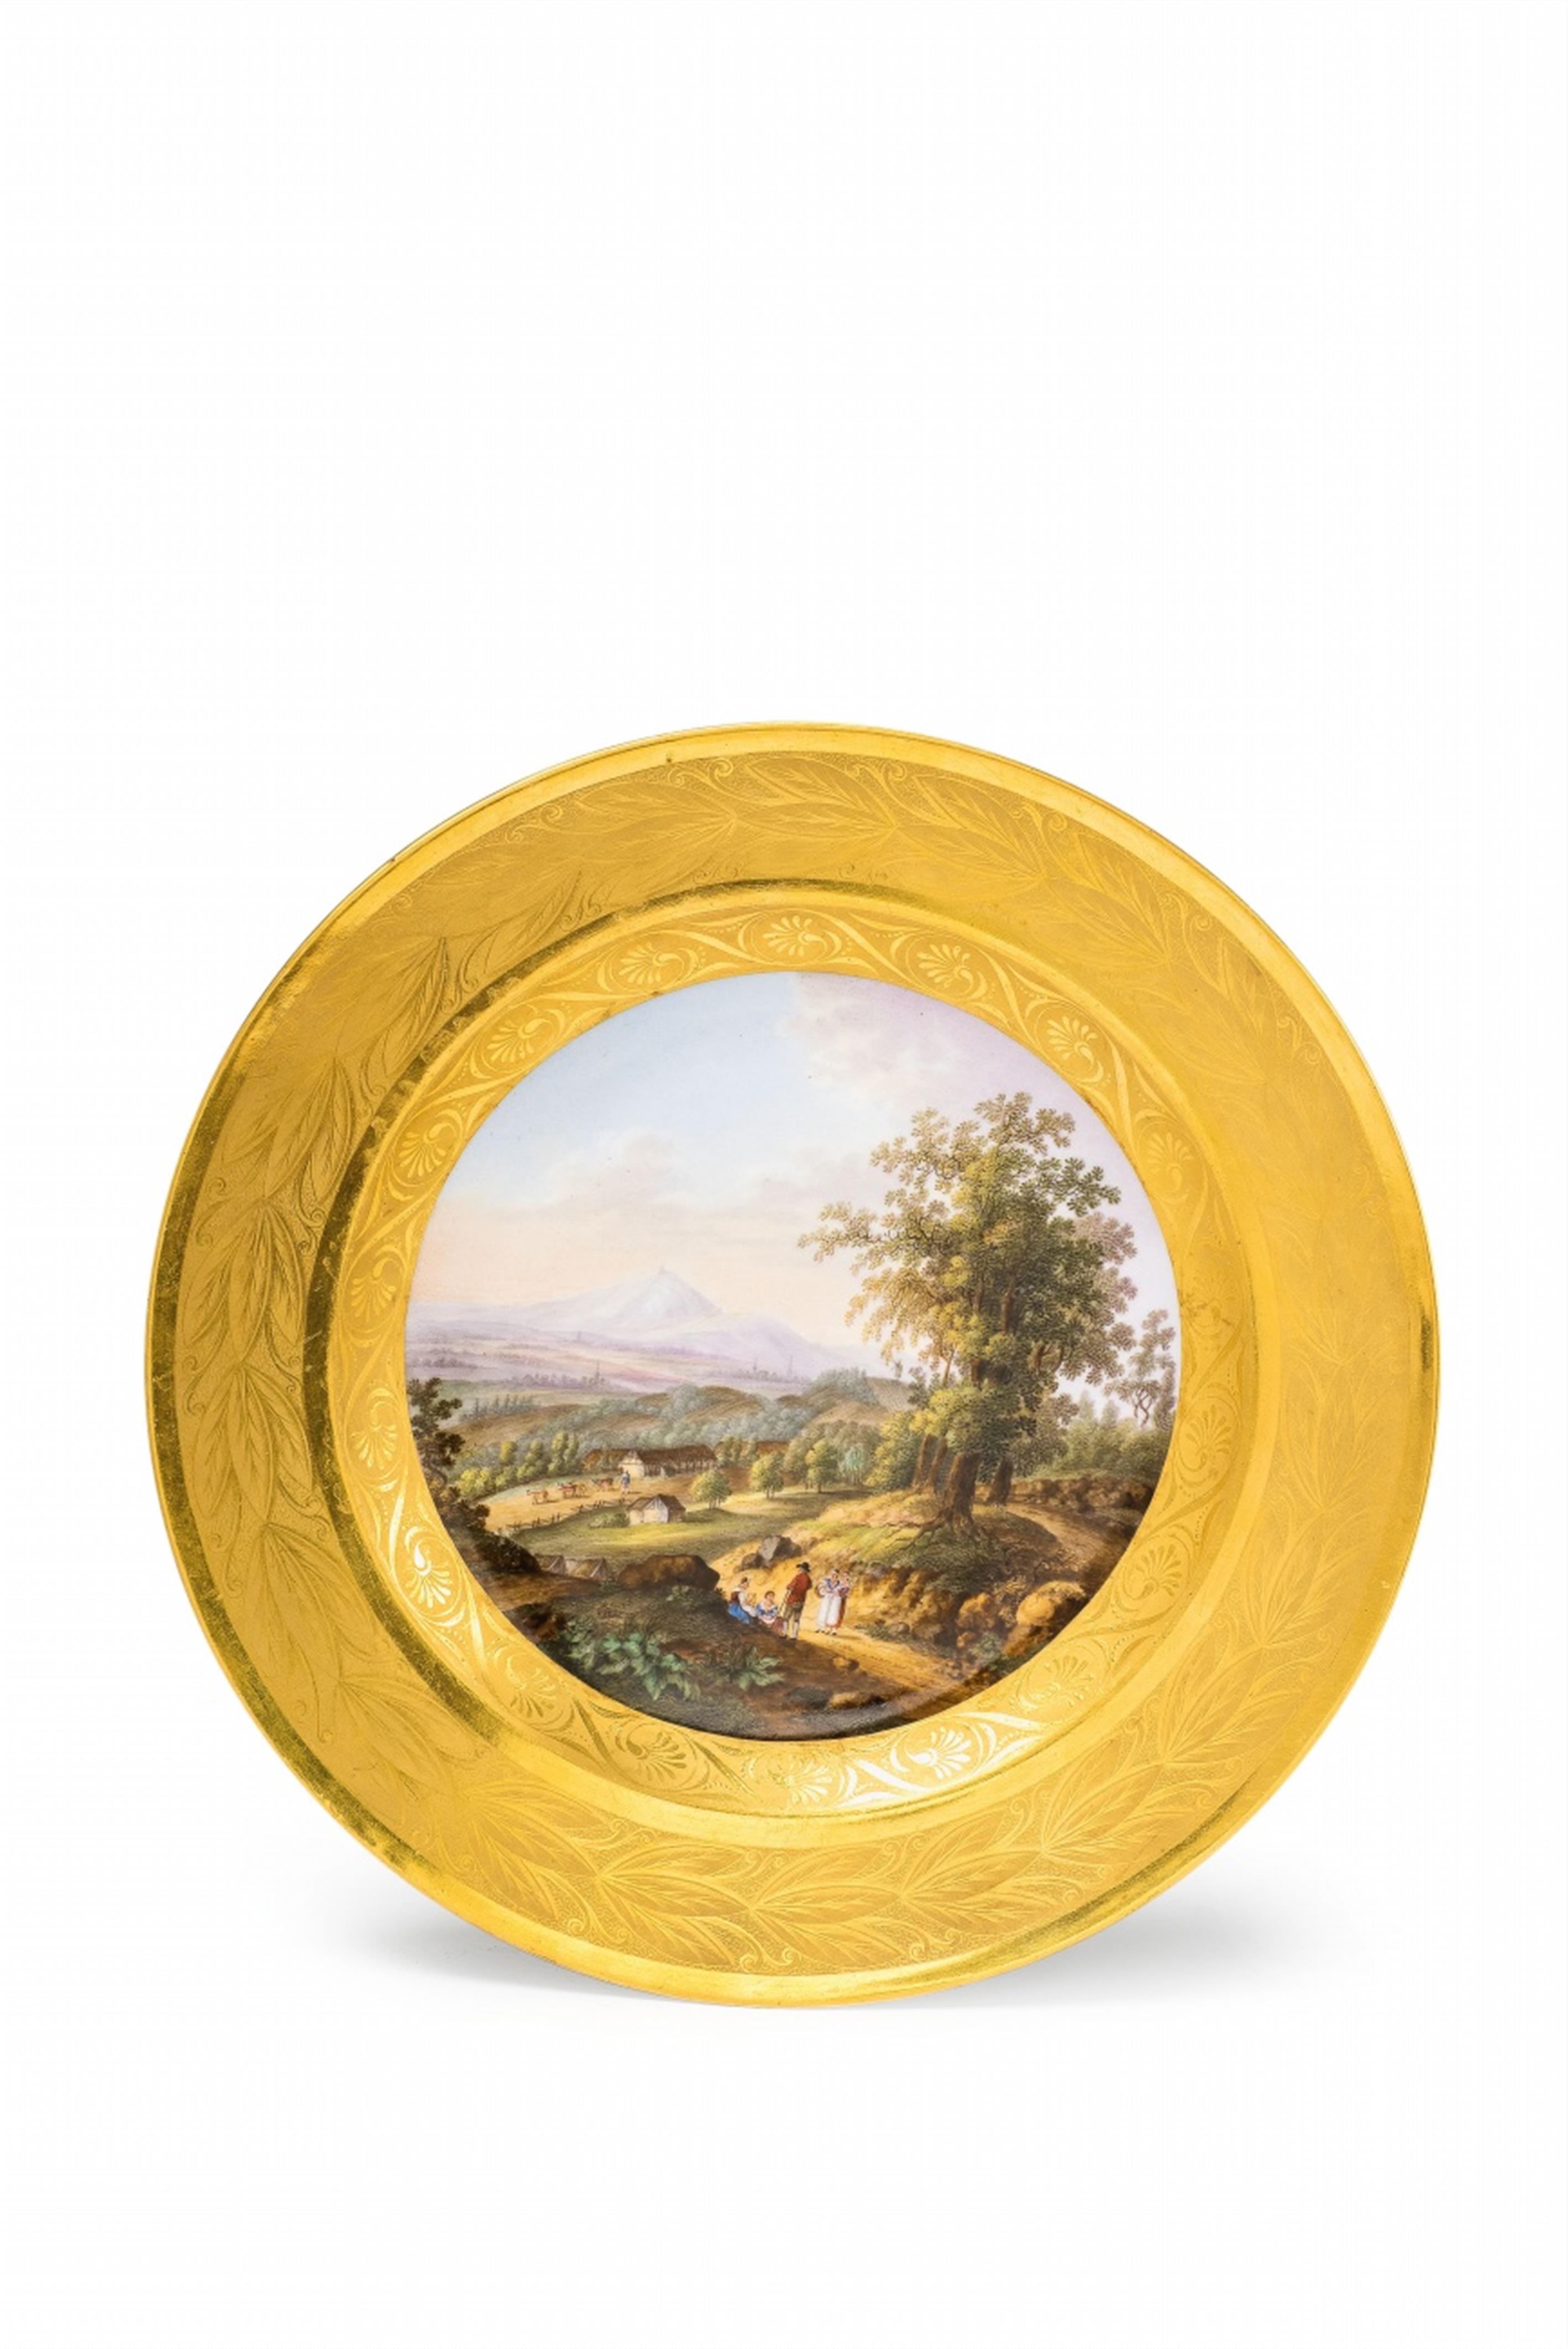 A Berlin KPM porcelain plate with a view of Hirschberger Valley in Silesia - image-1